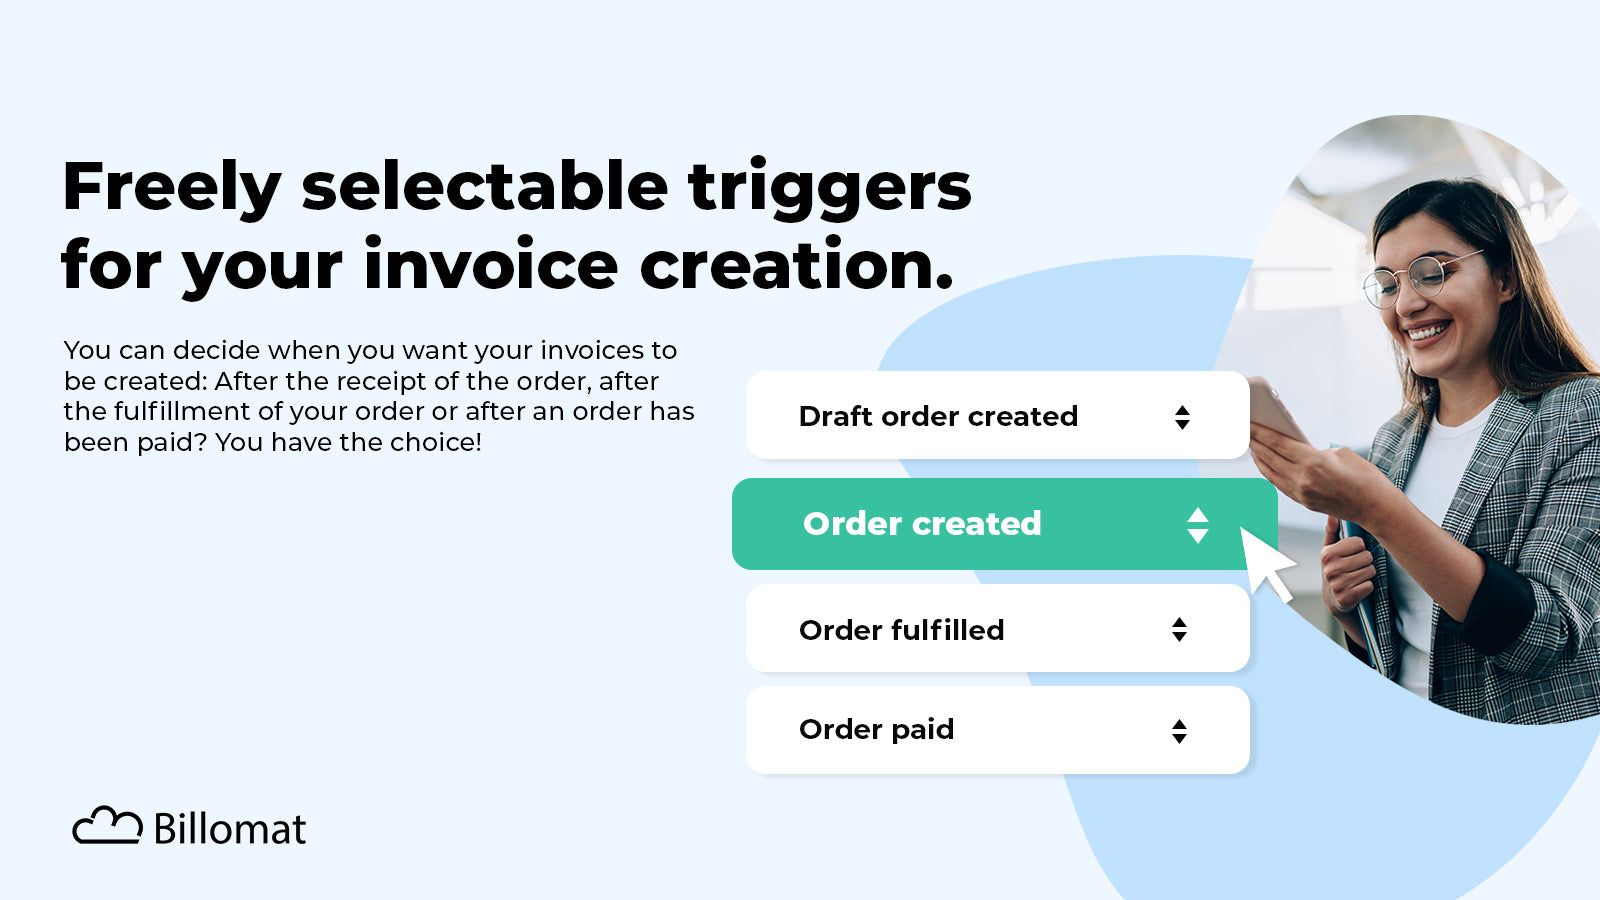 Freely selectable triggers for your invoice creation